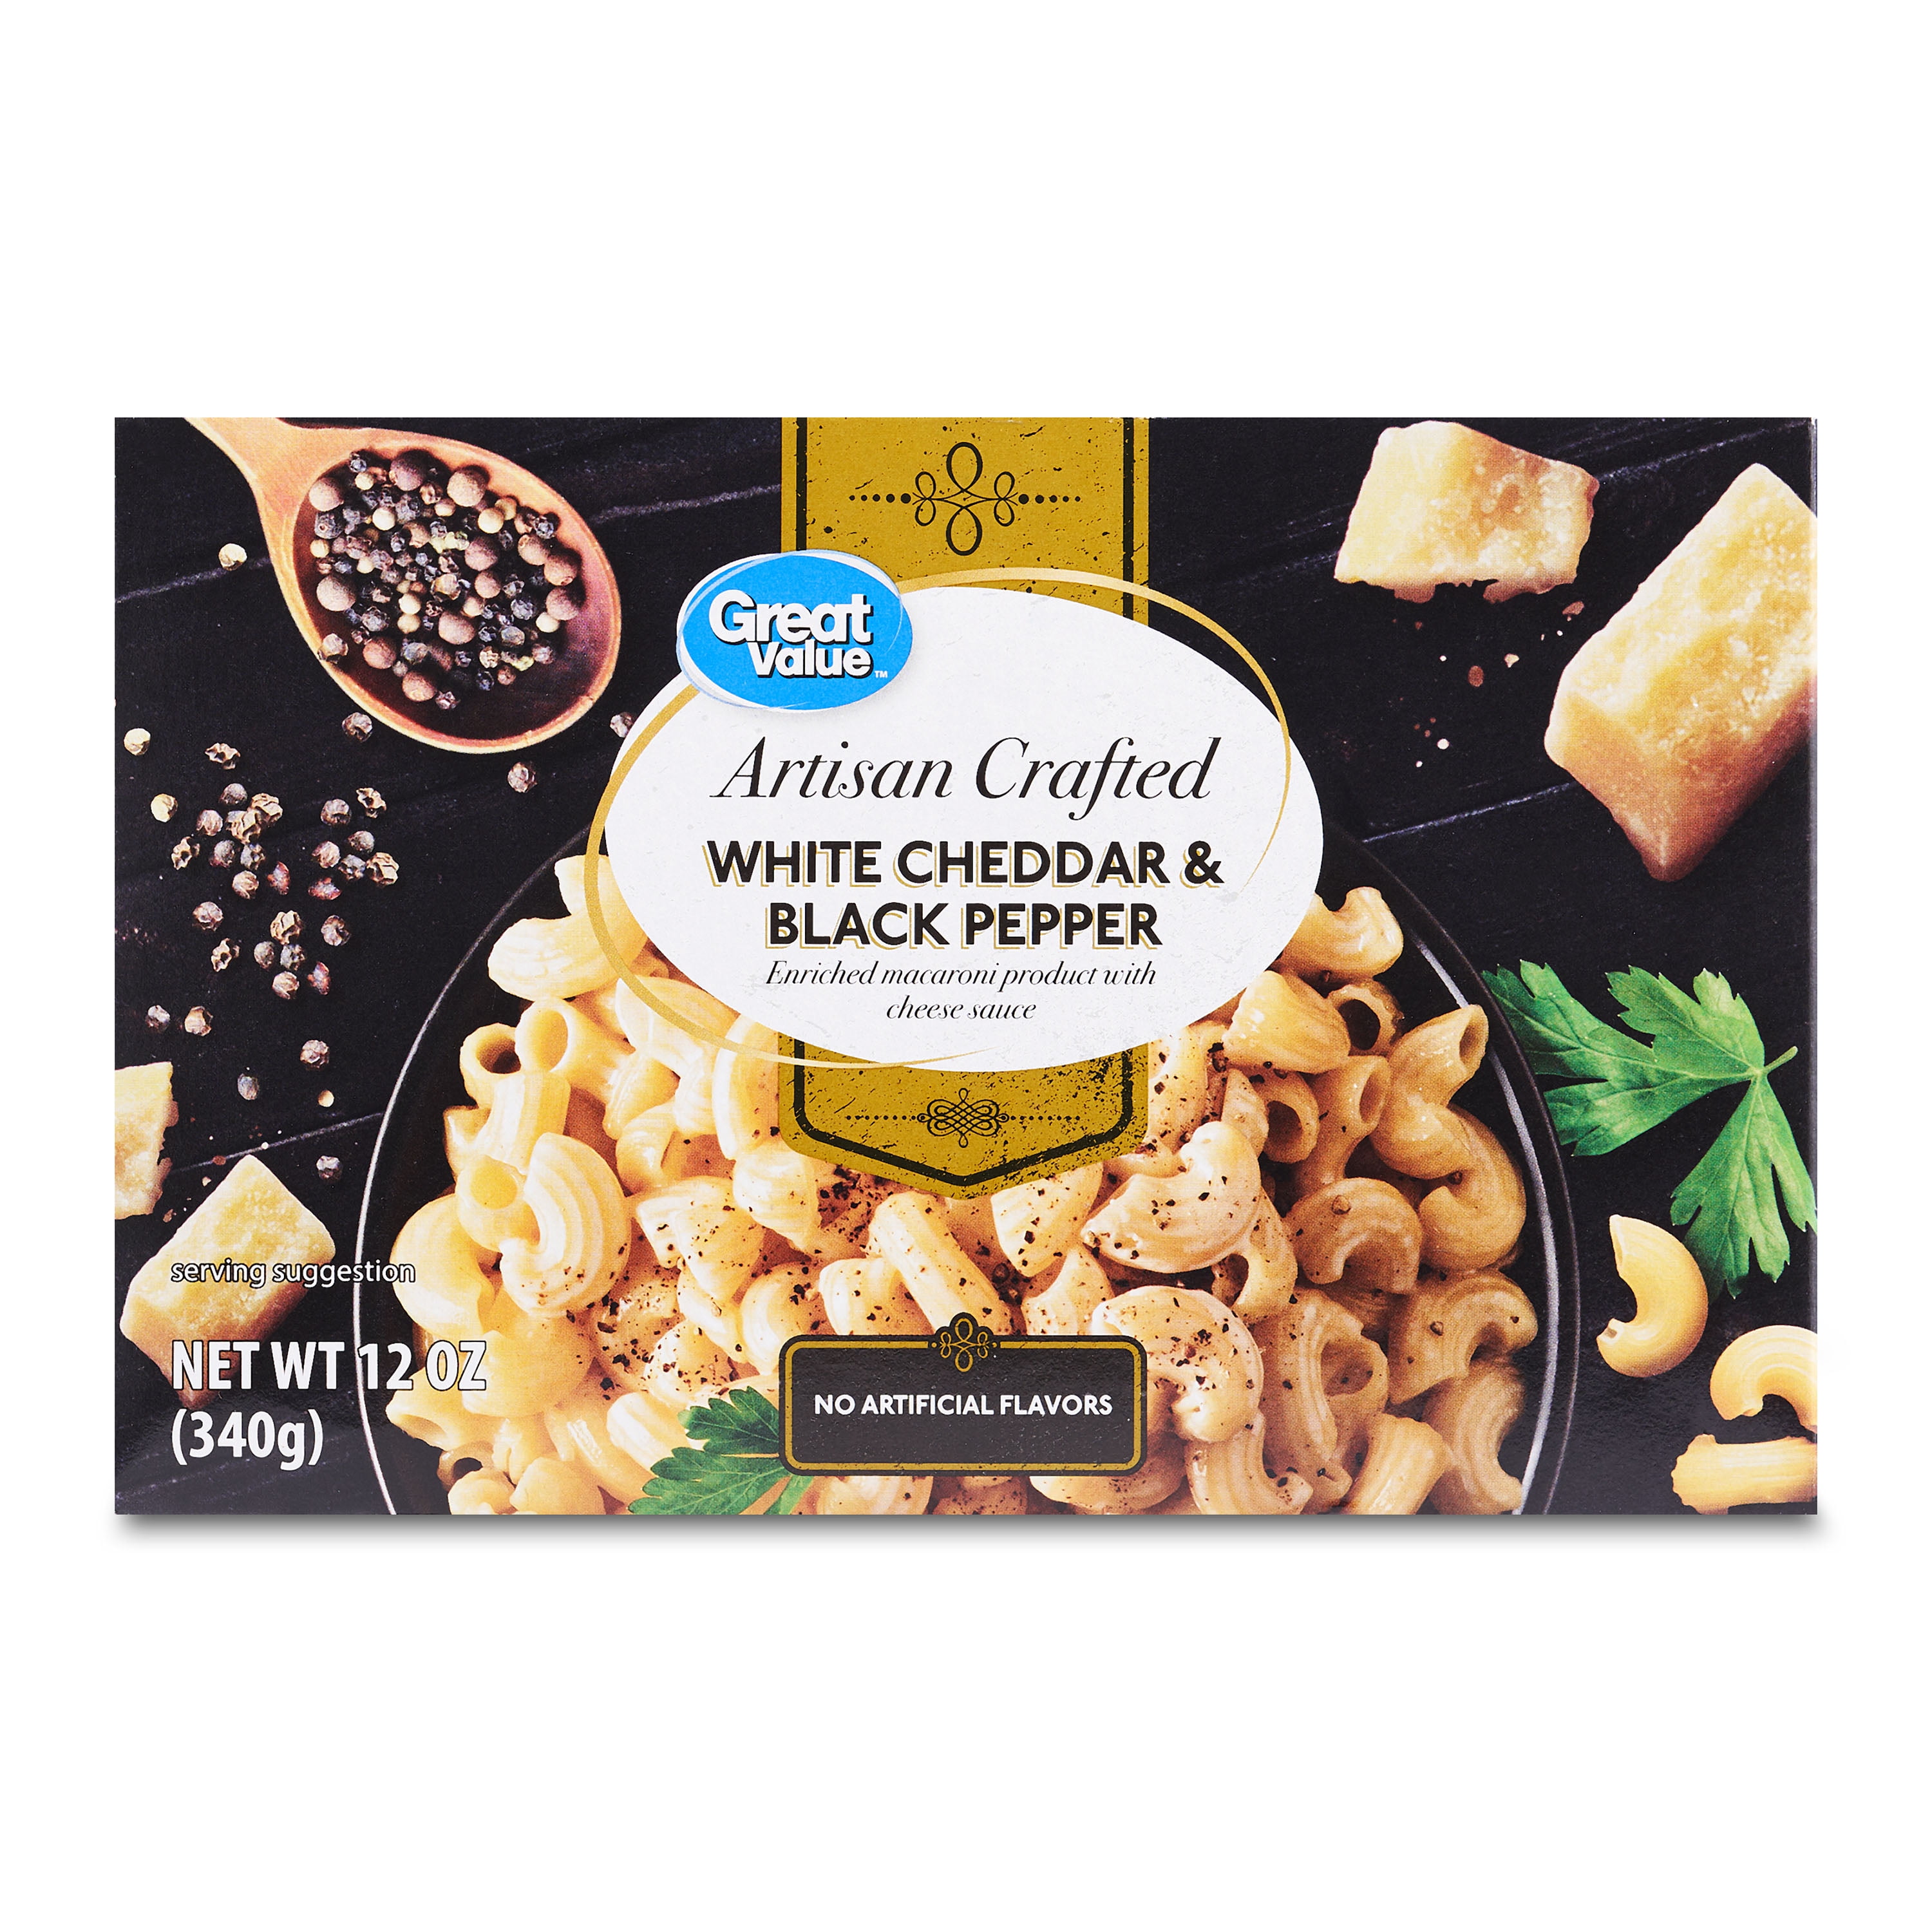 Great Value Artisan Crafted White Cheddar & Black Pepper Macaroni and Cheese, 12 oz